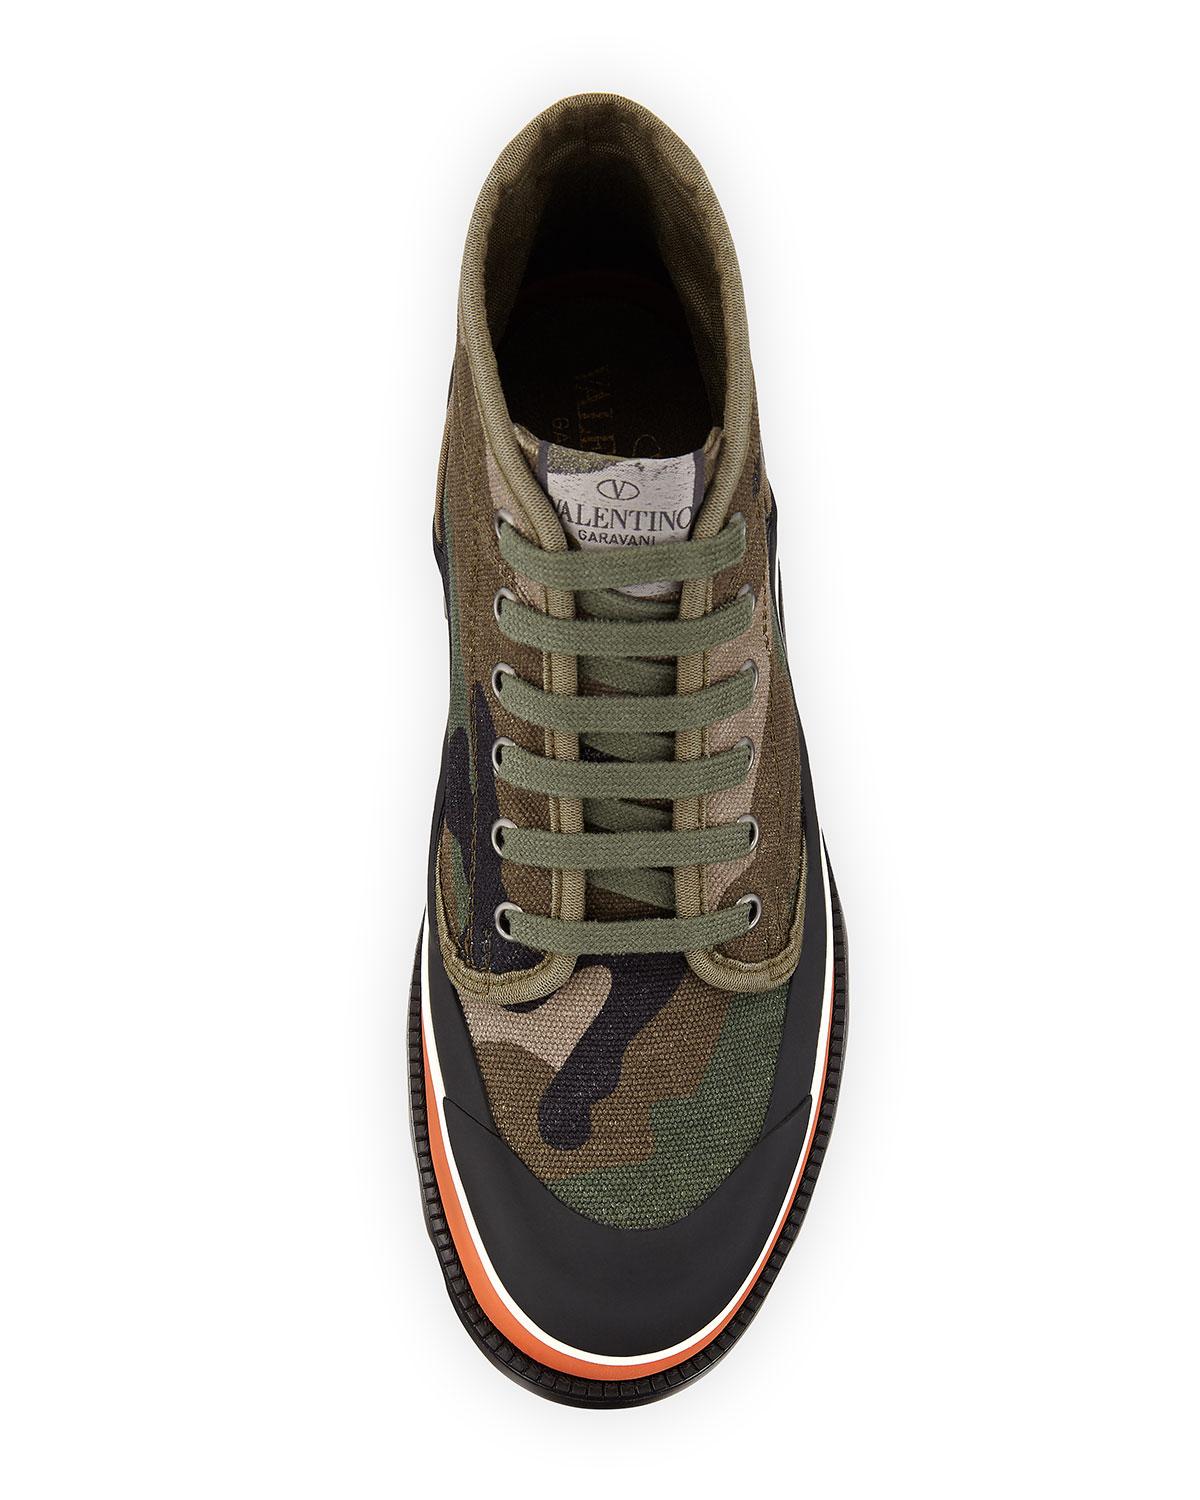 Valentino Camouflage Canvas High-top Sneaker in Green for Men - Lyst